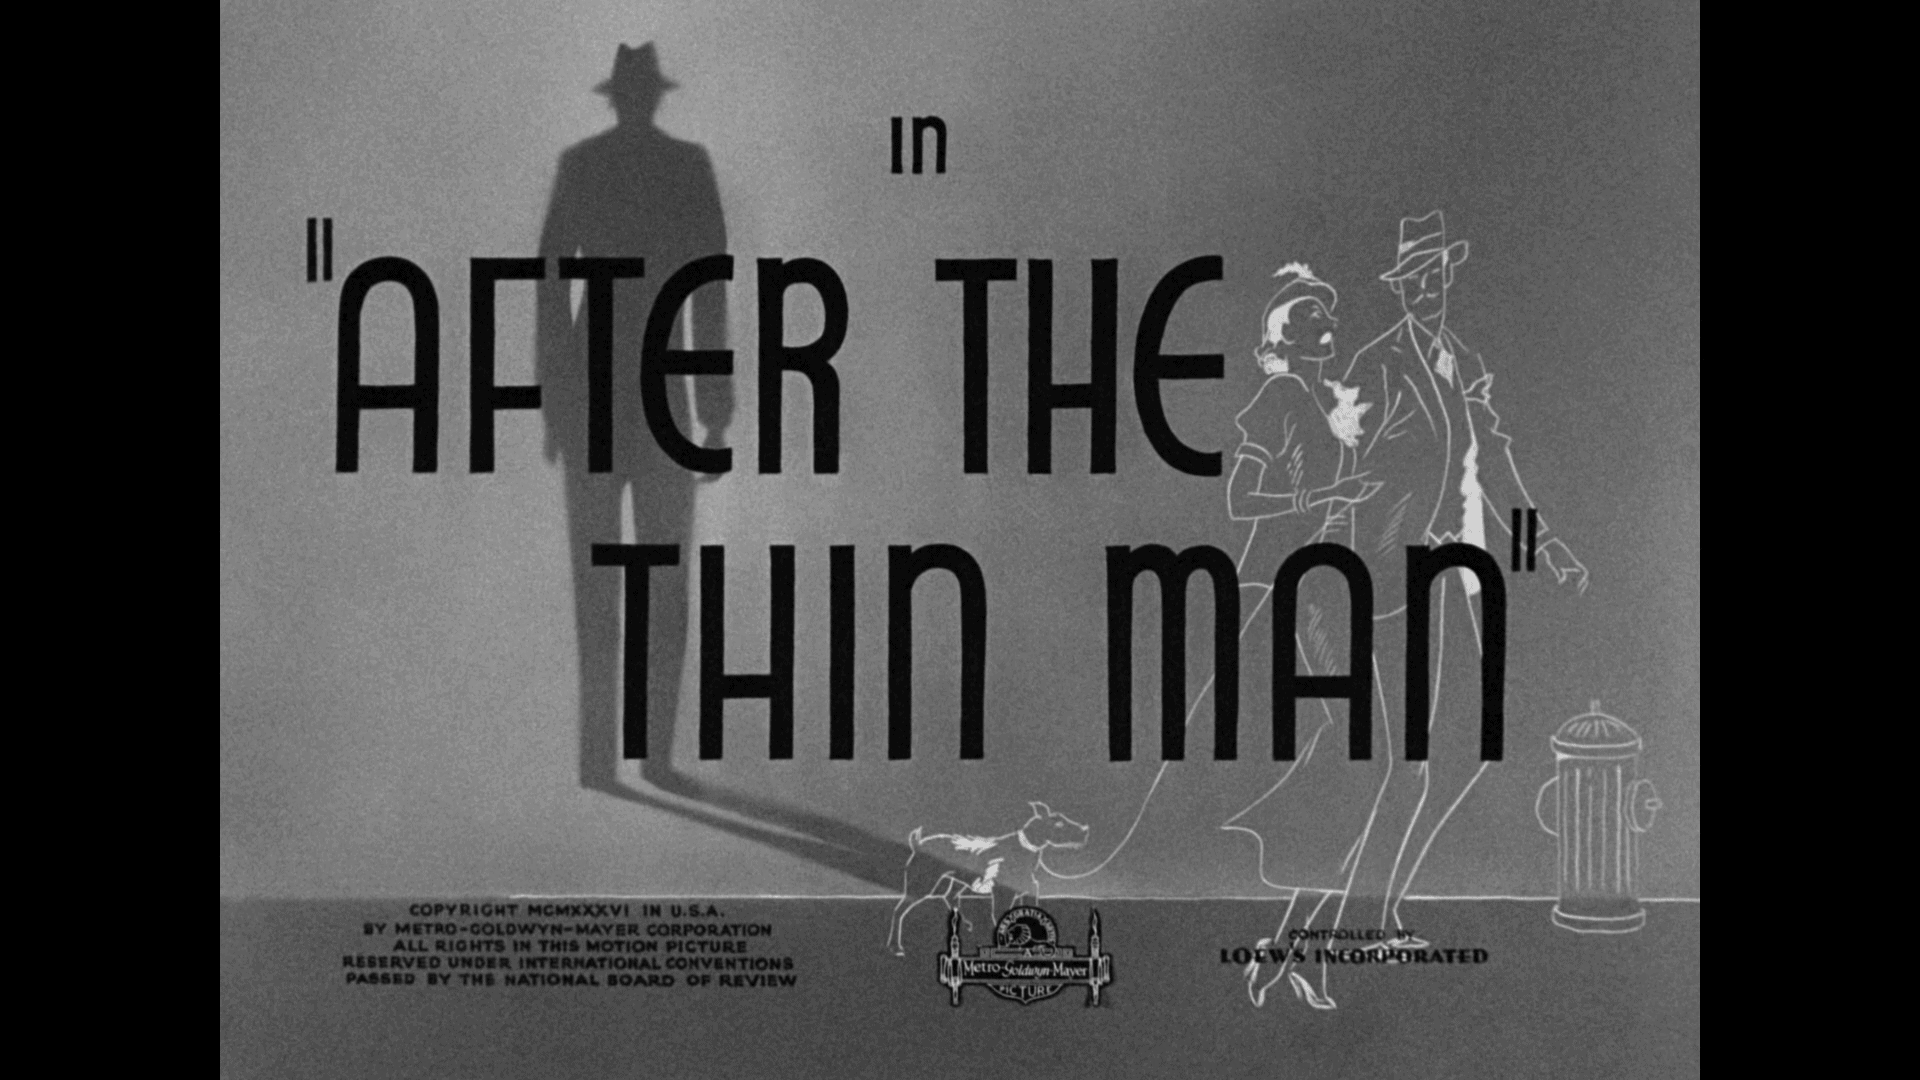 after the thin man title